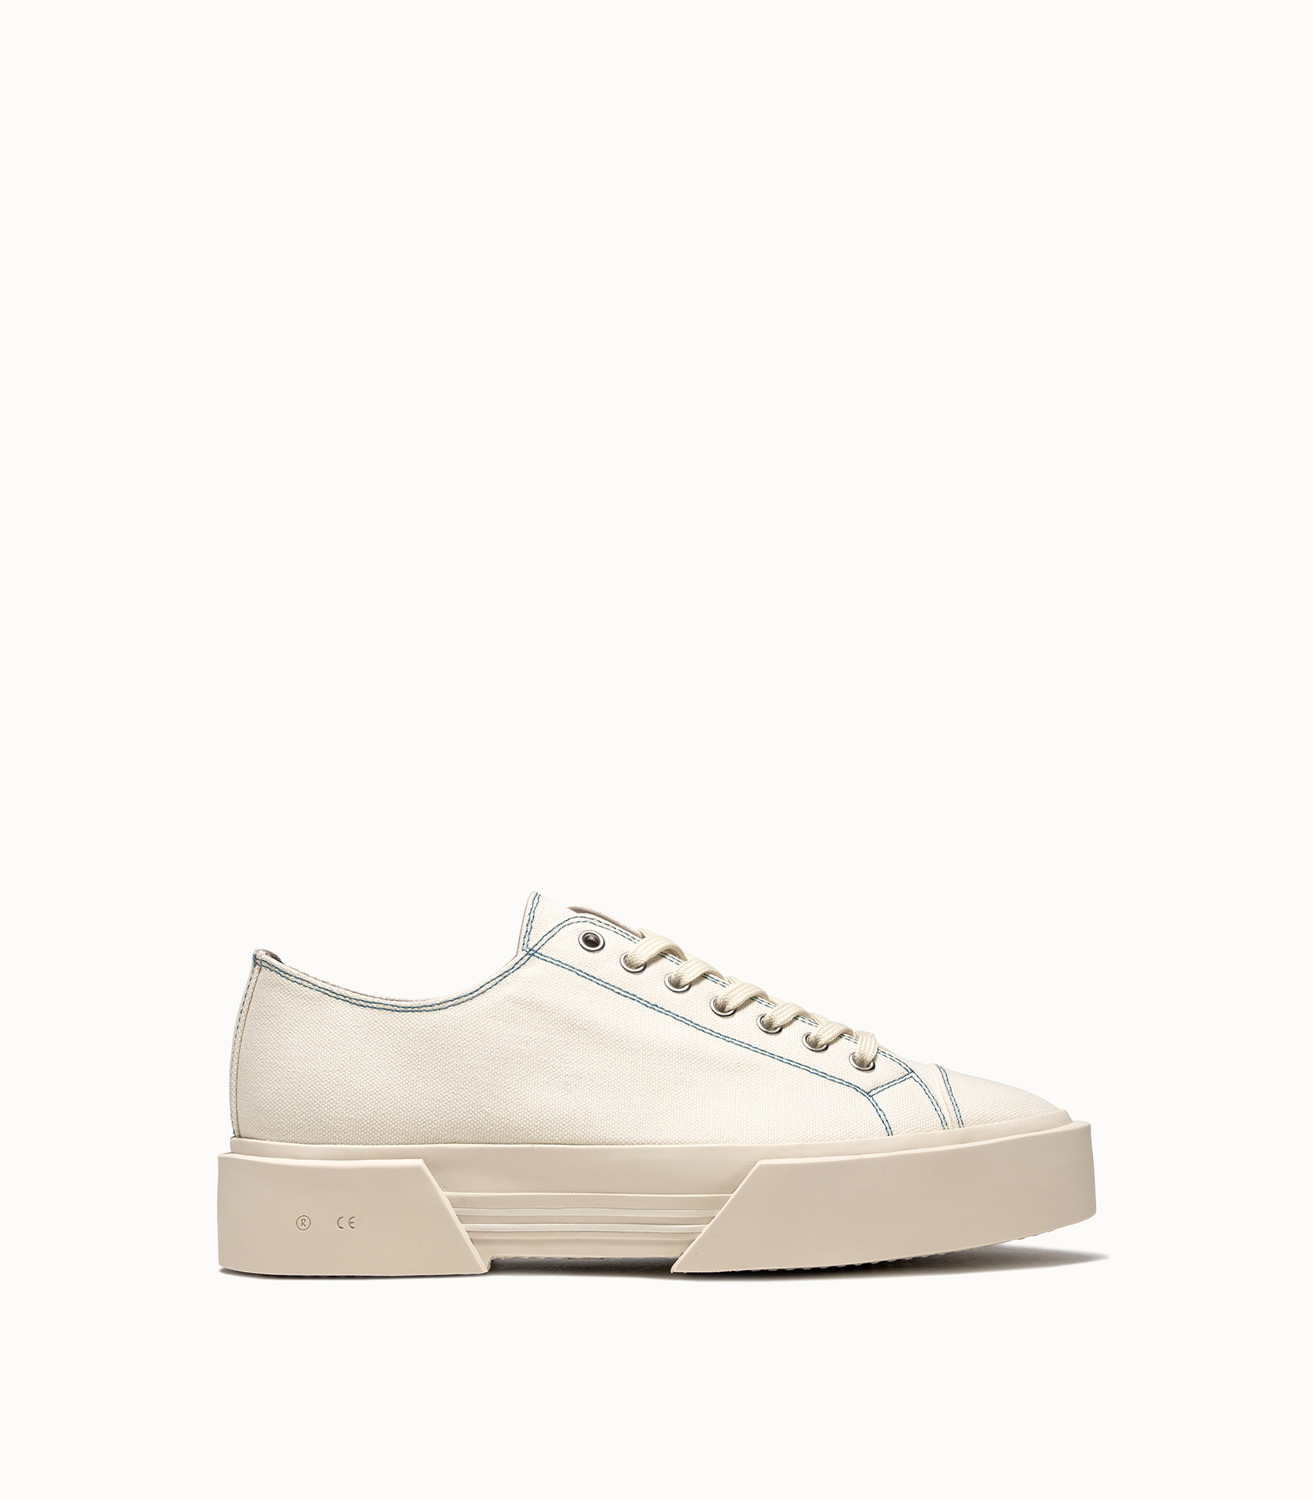 OAMC INFLATE PLIMSOLL SNEAKERS COLOR 